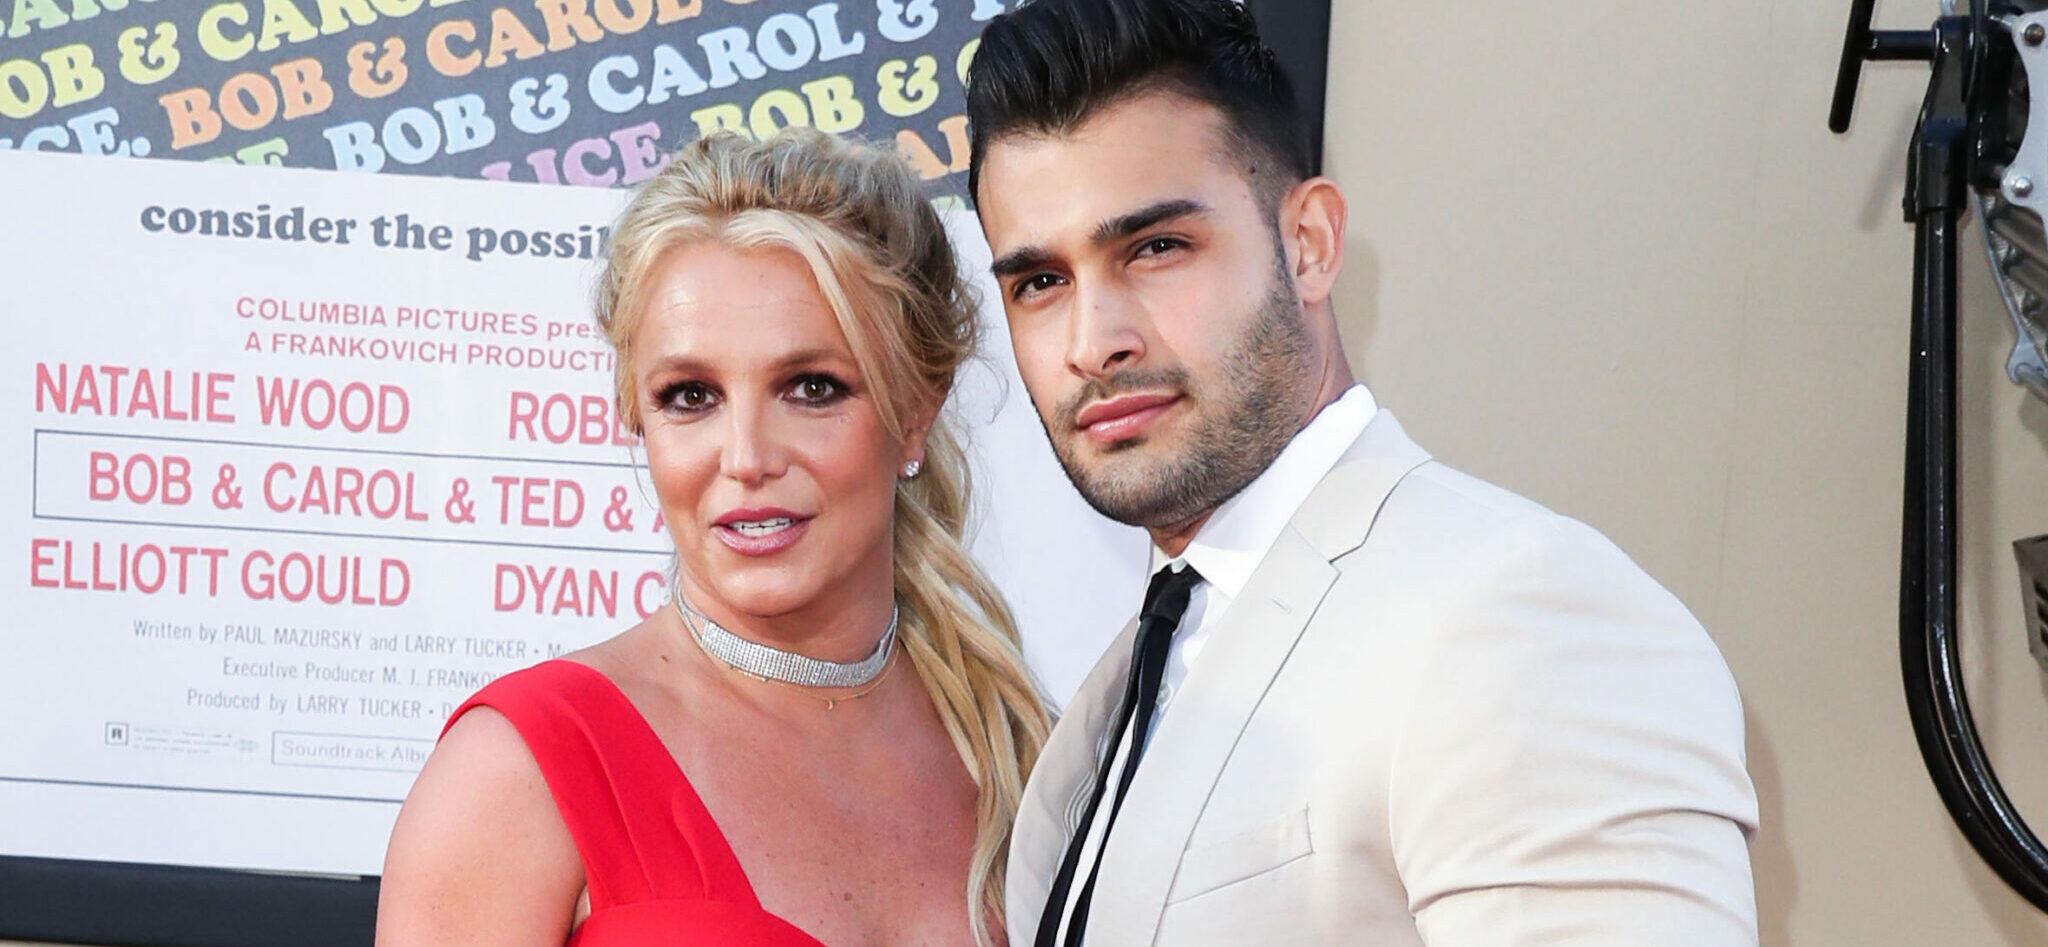 Britney Spears Says She Felt ‘Giddy’ About Having A Baby With Sam Asghari